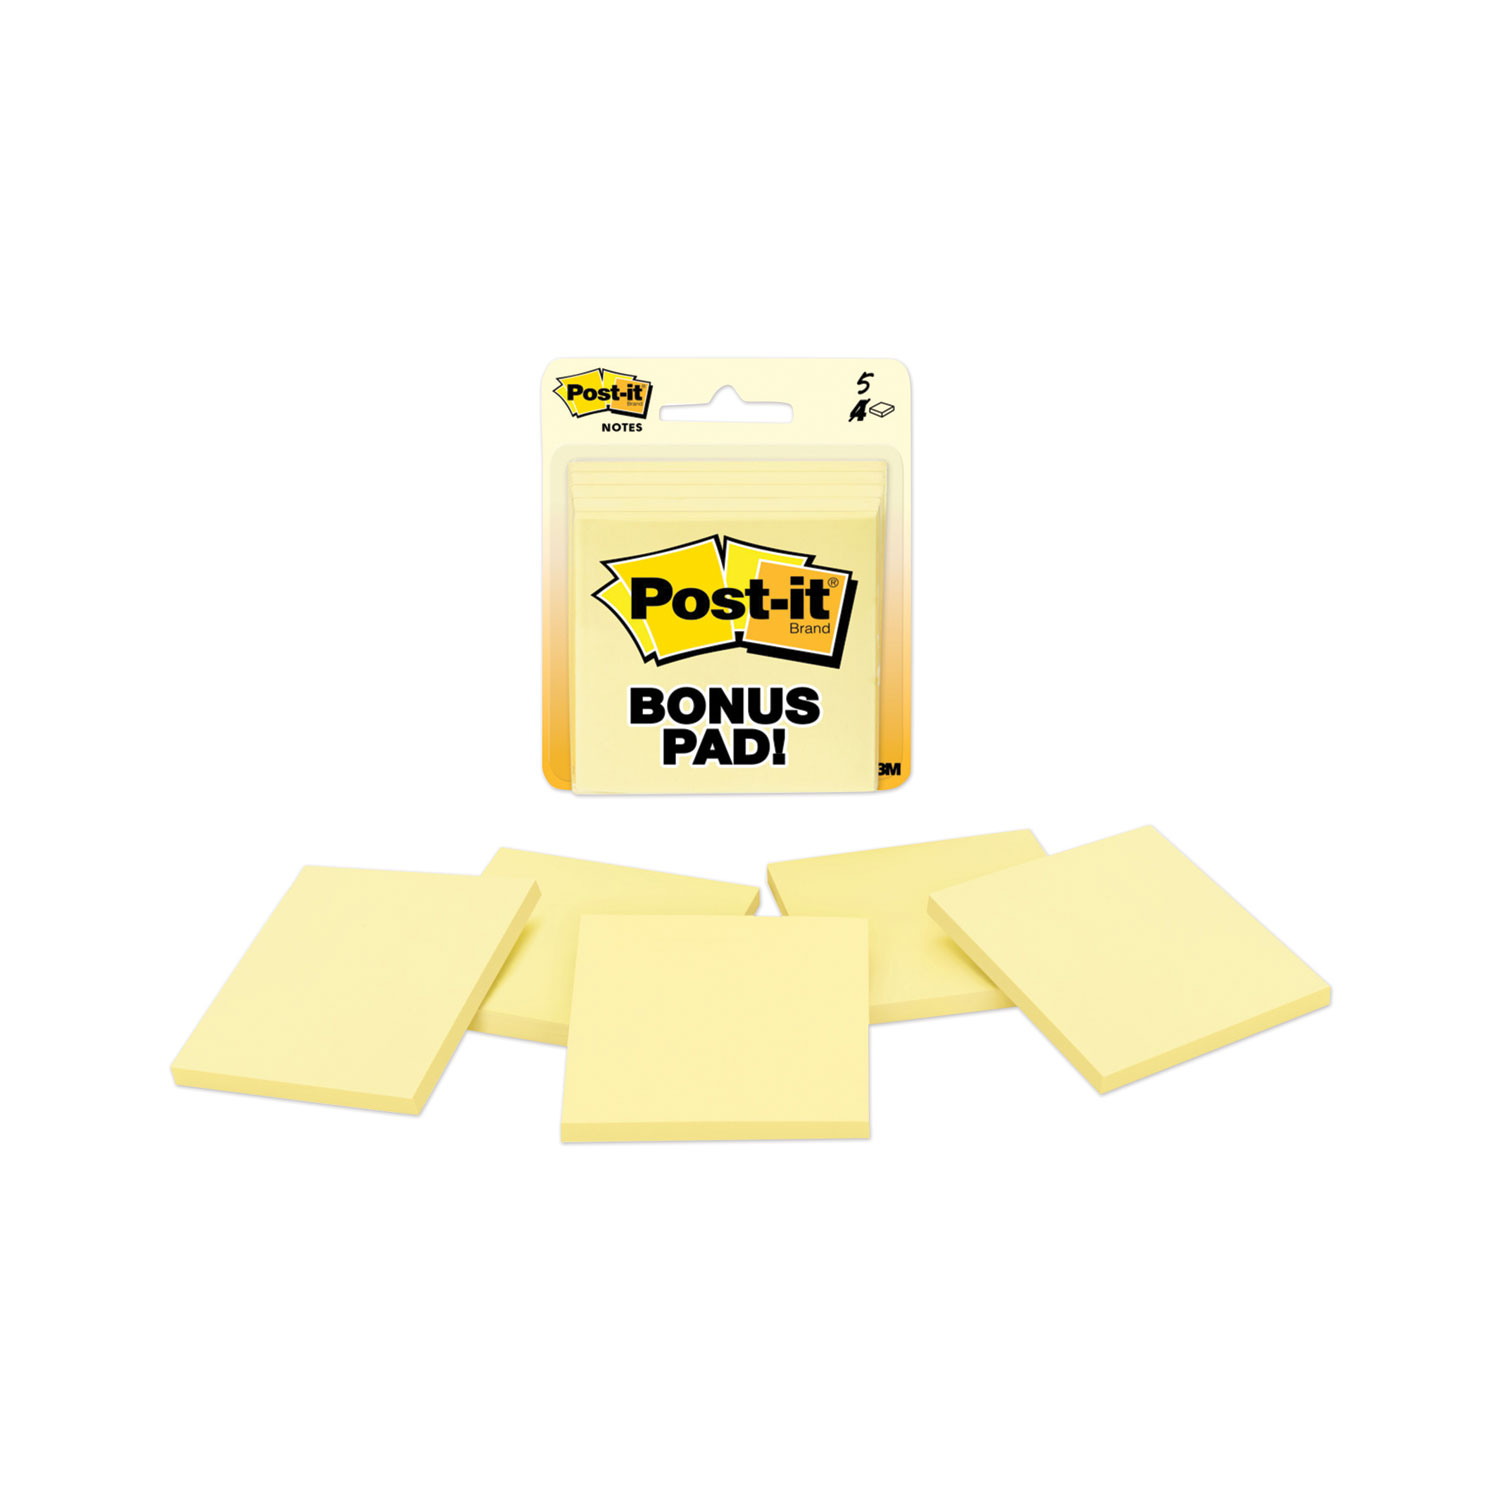  Post-it Notes 5400 Original Pads in Canary Yellow, 3 x 3, 50 Sheets/Pad, 4 Pads/Pack (MMM70070722551) 